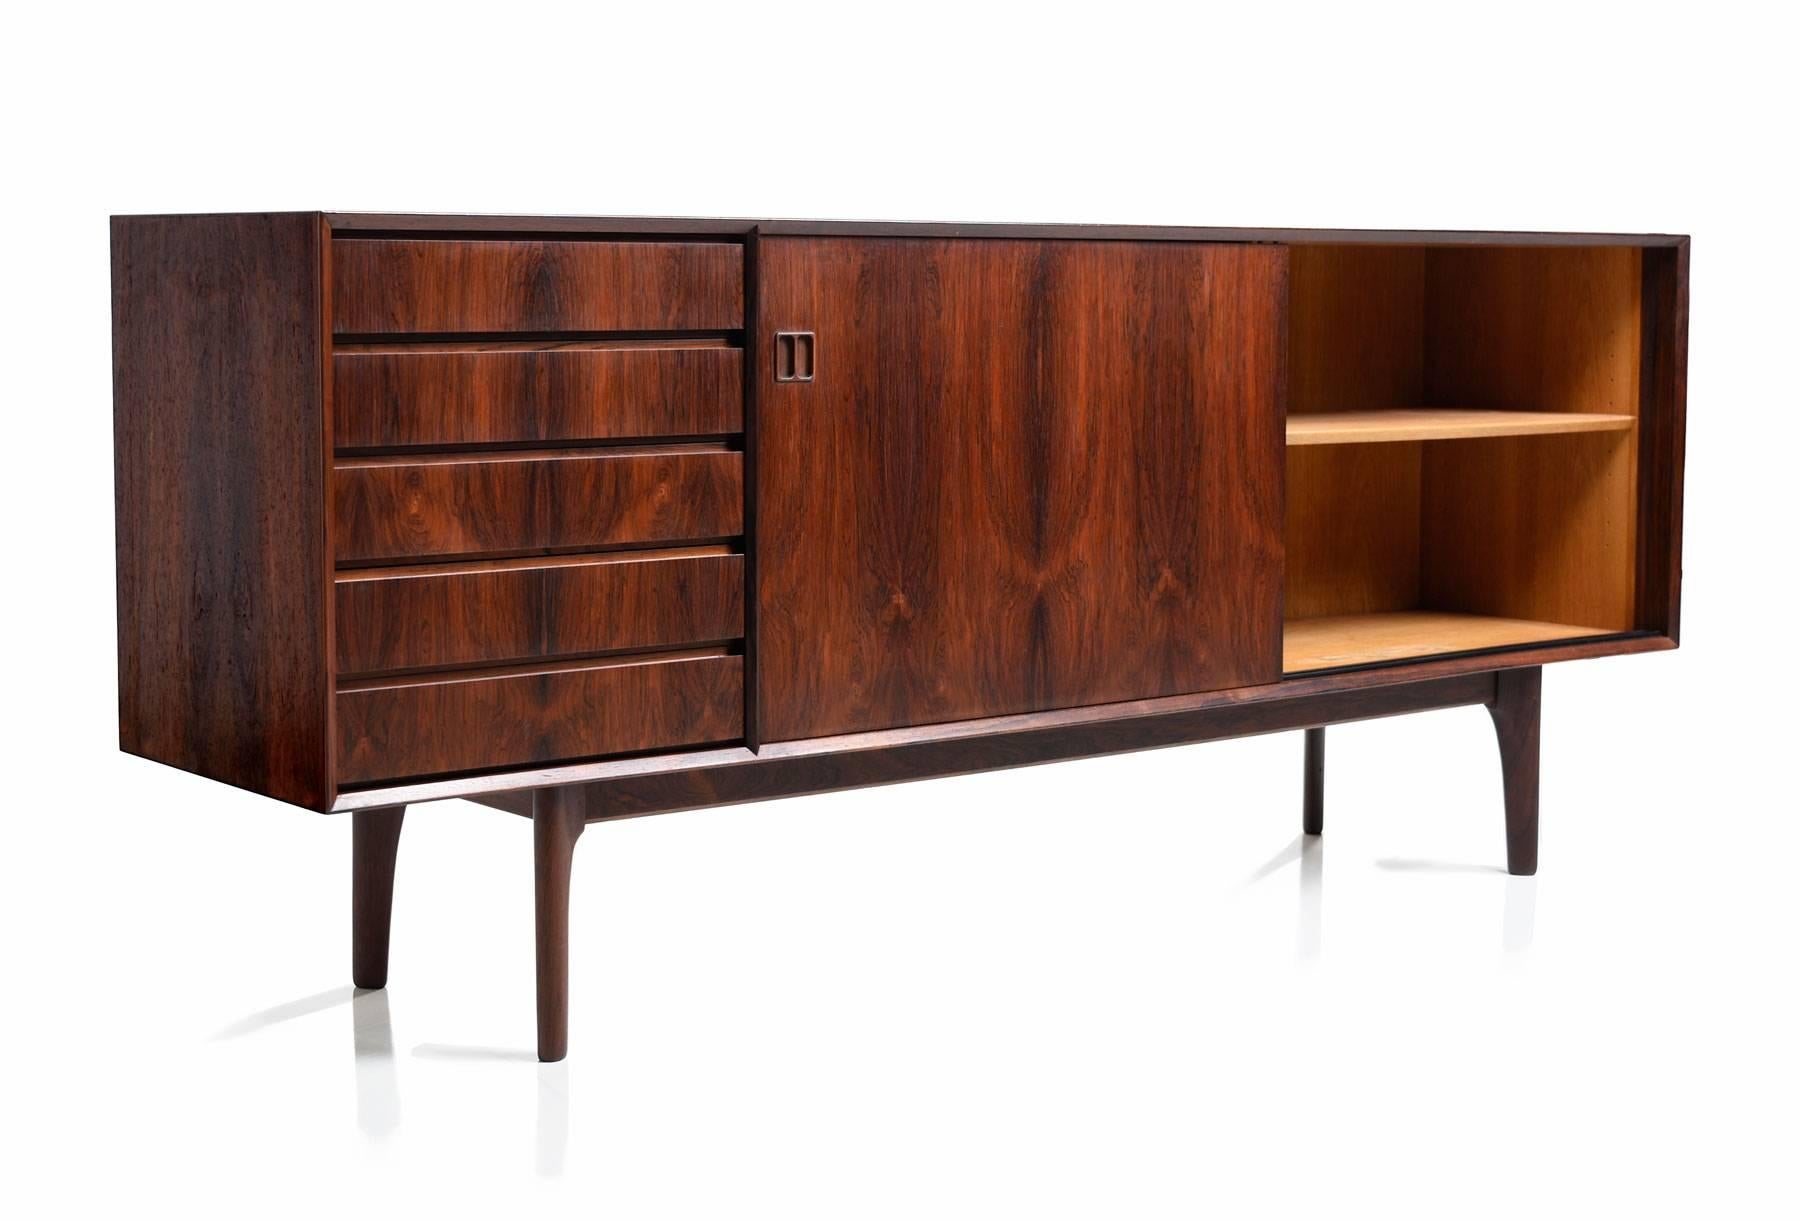 The rich, oxblood colored rosewood is the high water mark of Scandinavian cabinet making. Notice the wild, flaring, cathedral grain. The old growth trees that supplied manufacturers during the midcentury are long gone. Sliding cabinet doors reveal